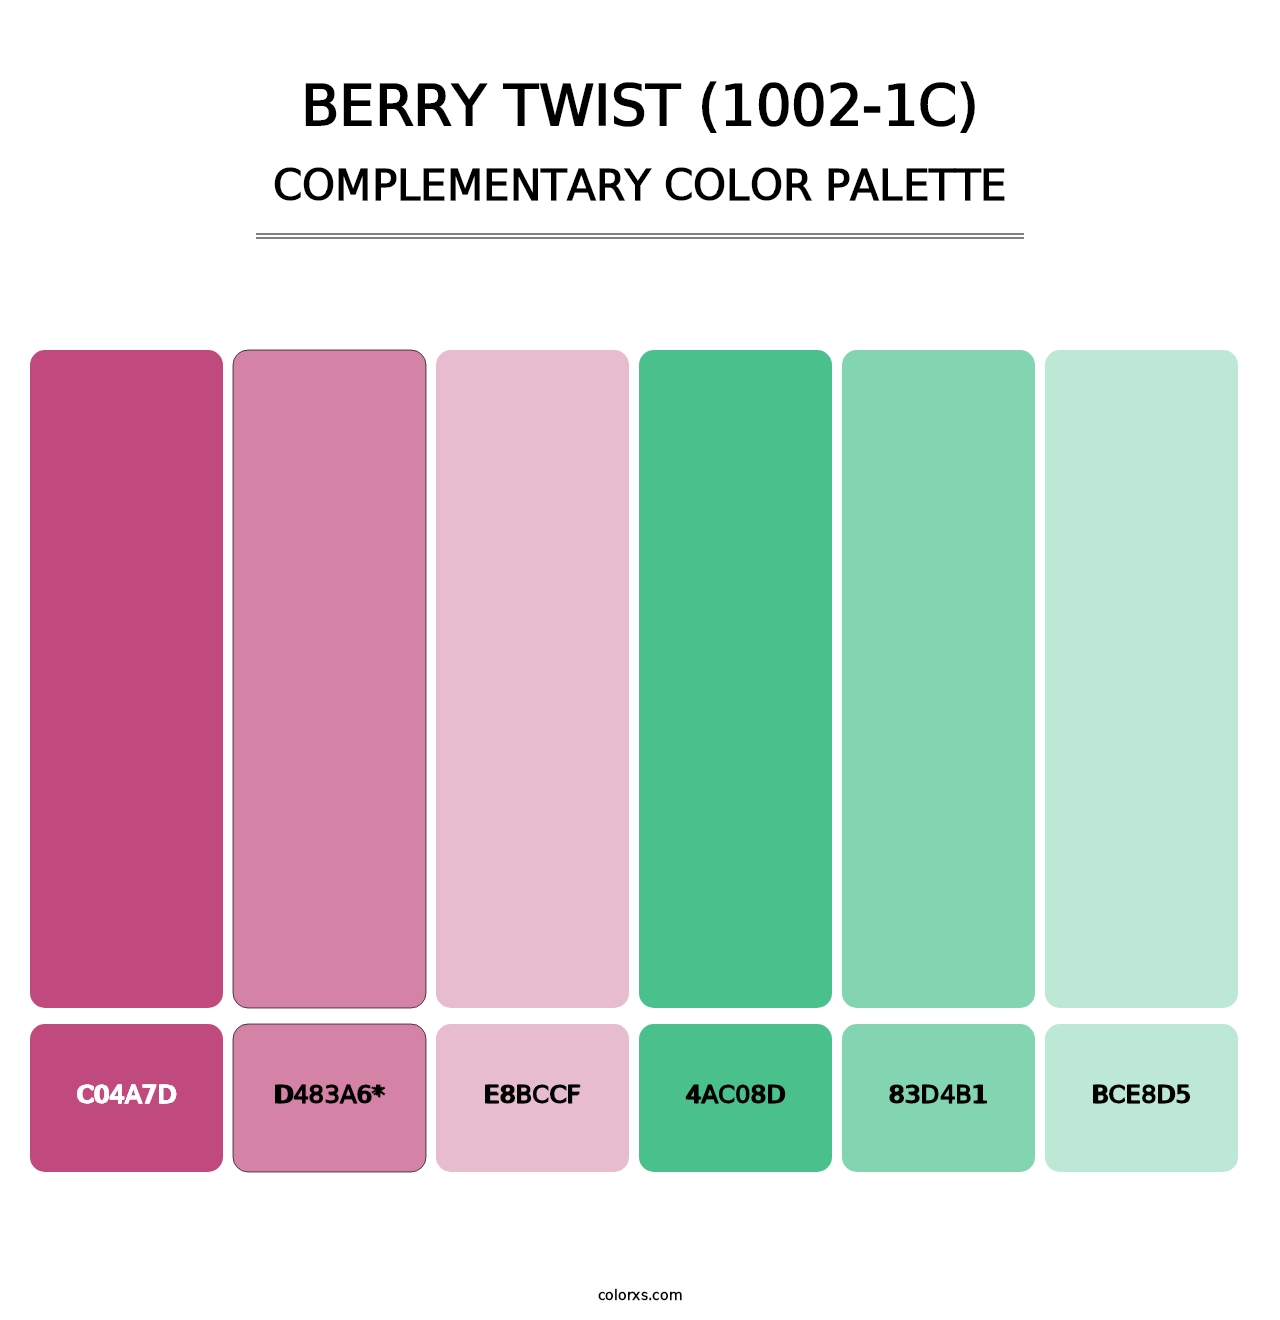 Berry Twist (1002-1C) - Complementary Color Palette